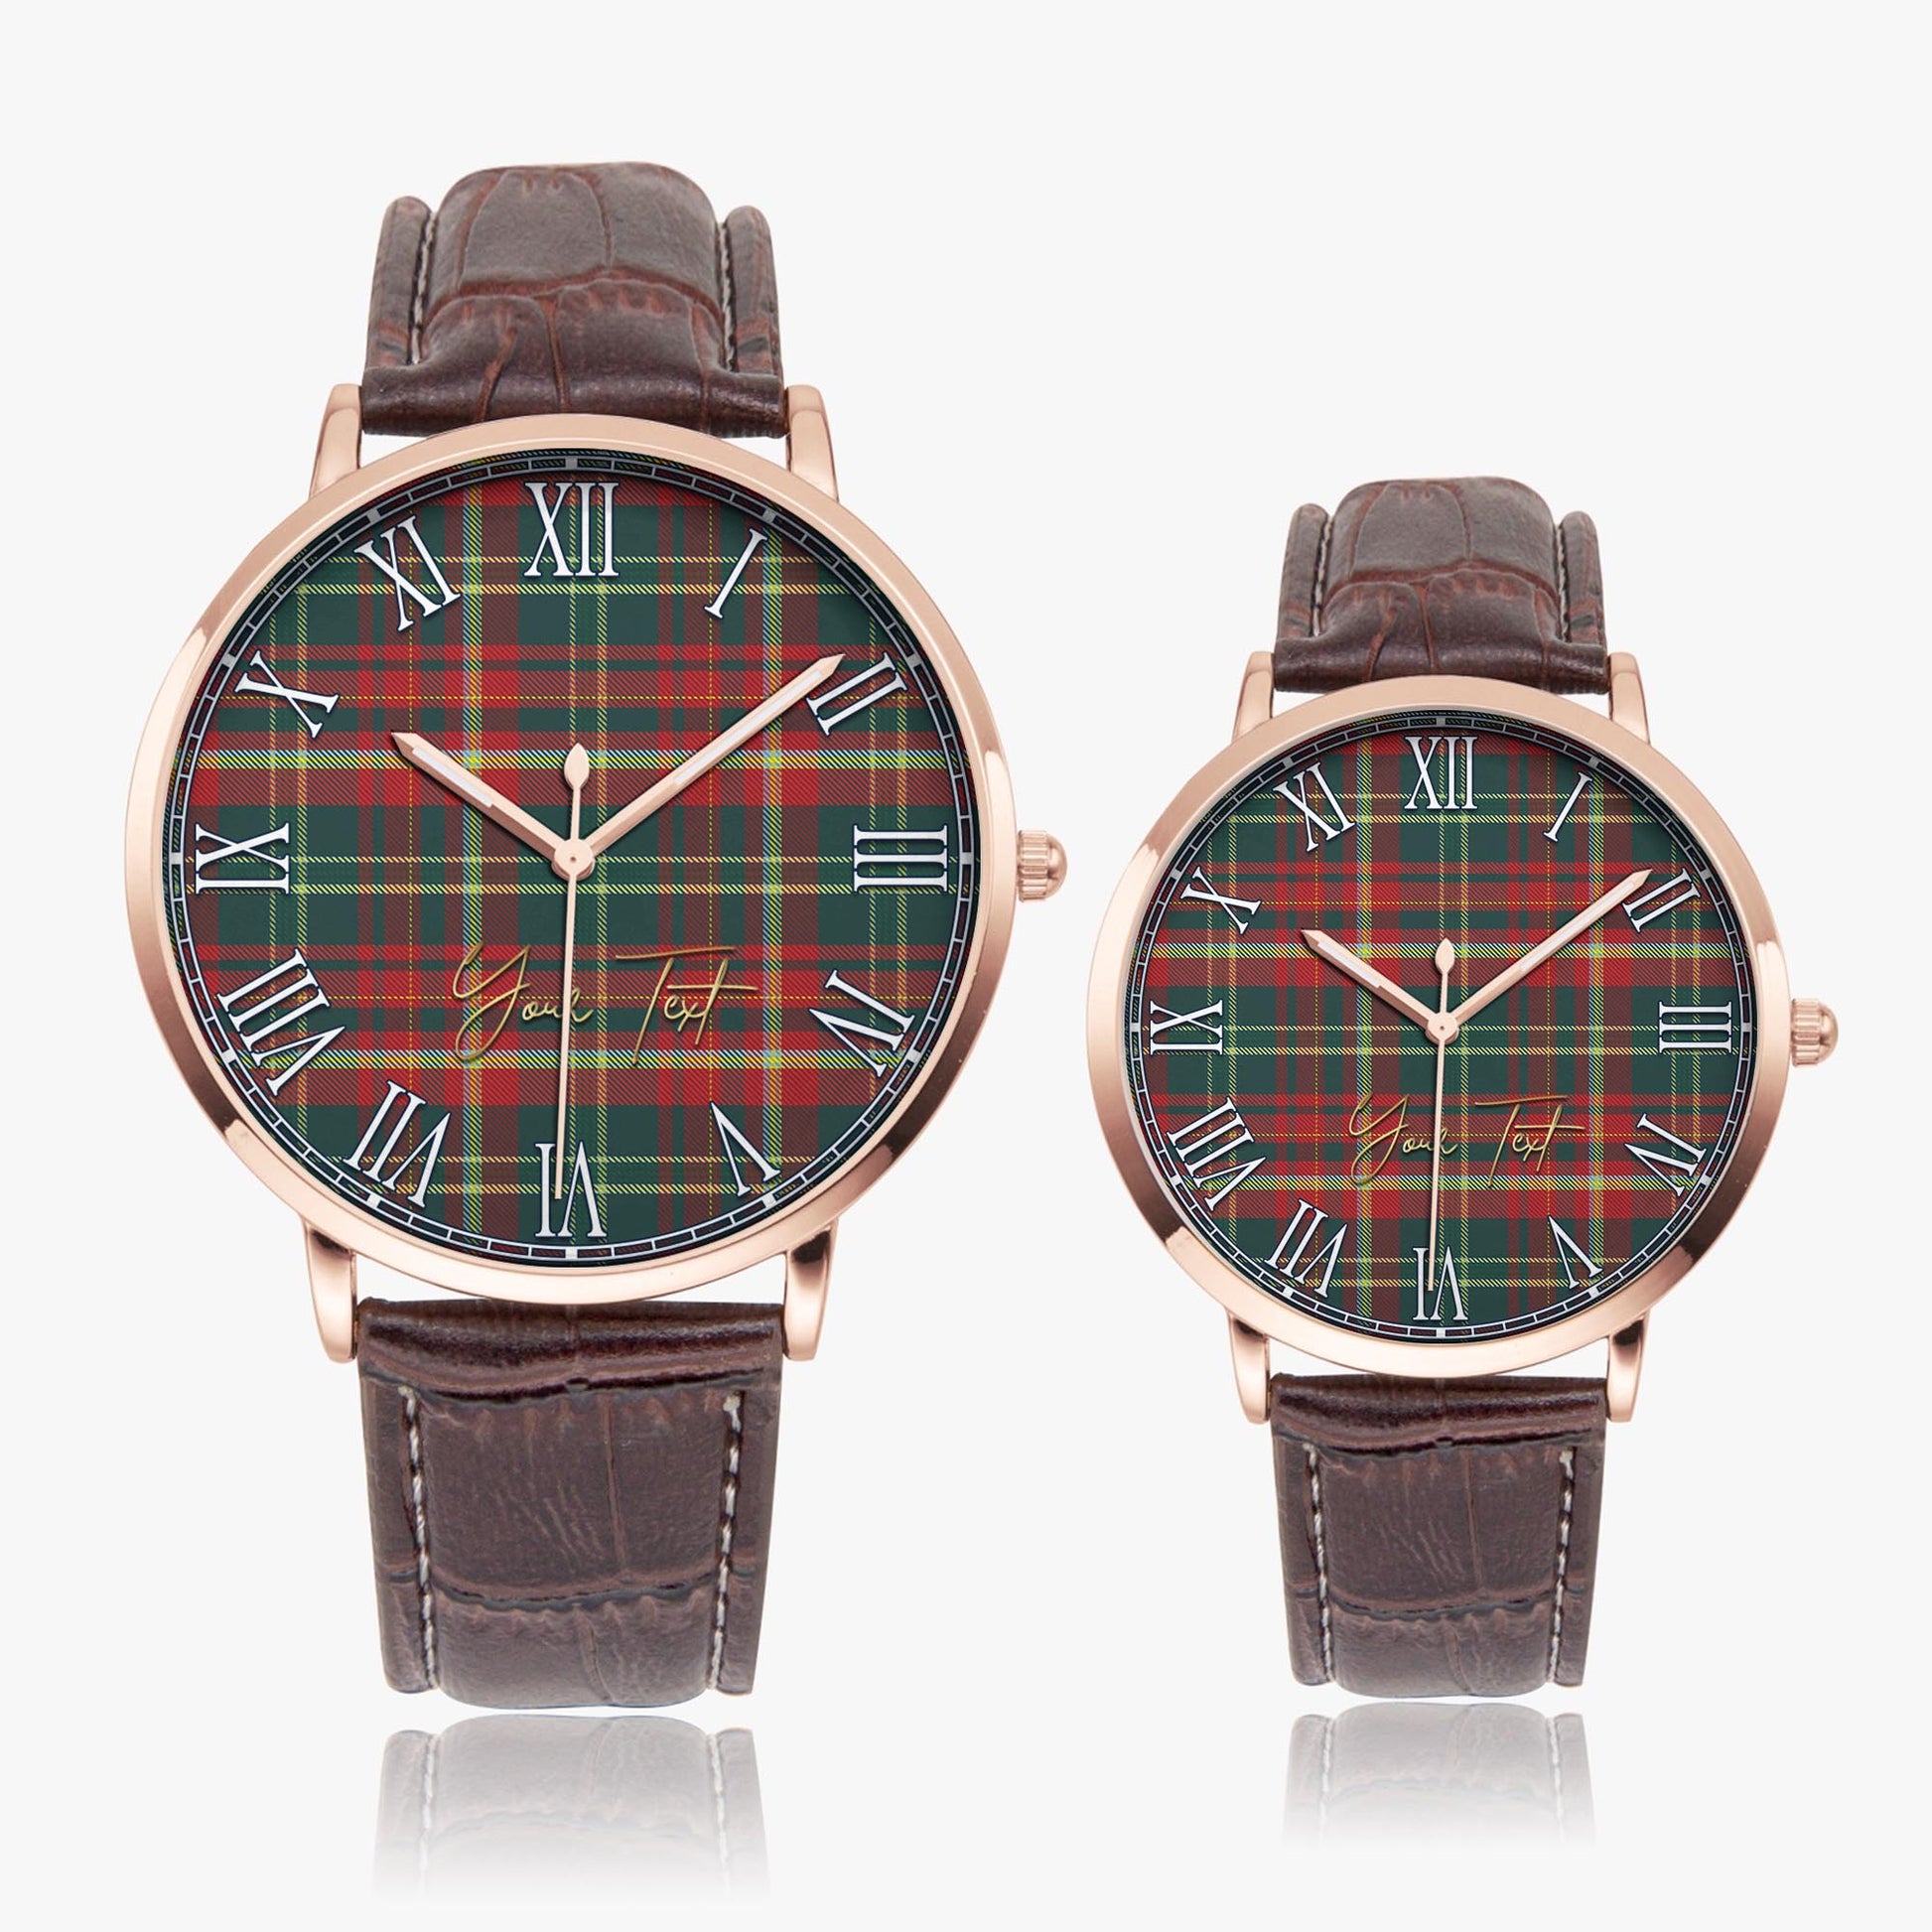 New Brunswick Province Canada Tartan Personalized Your Text Leather Trap Quartz Watch Ultra Thin Rose Gold Case With Brown Leather Strap - Tartanvibesclothing